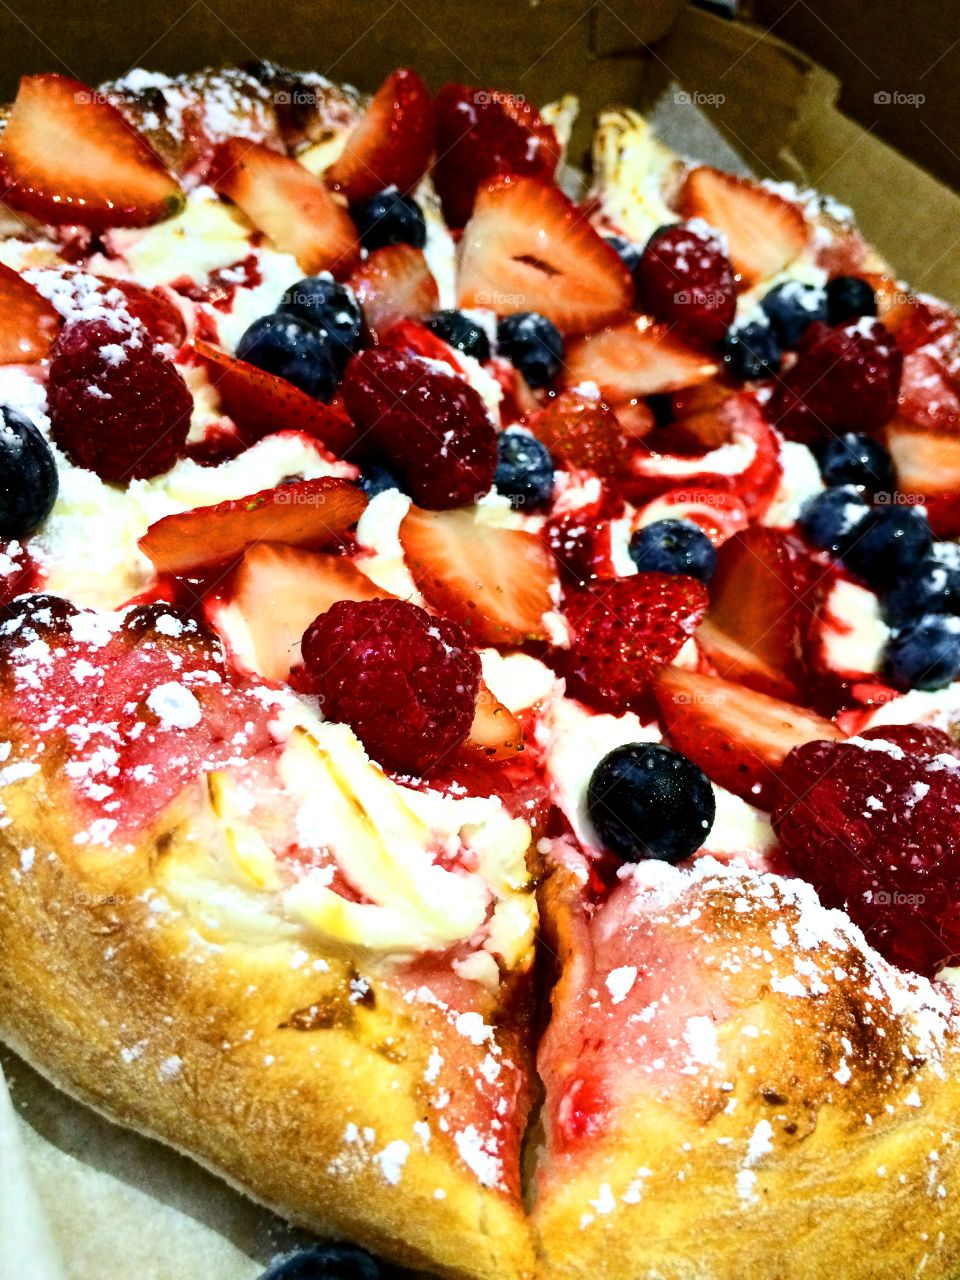 Fruit Tart Pizza. A pizza with a fruity twist. It's actually a dessert! So sweet!